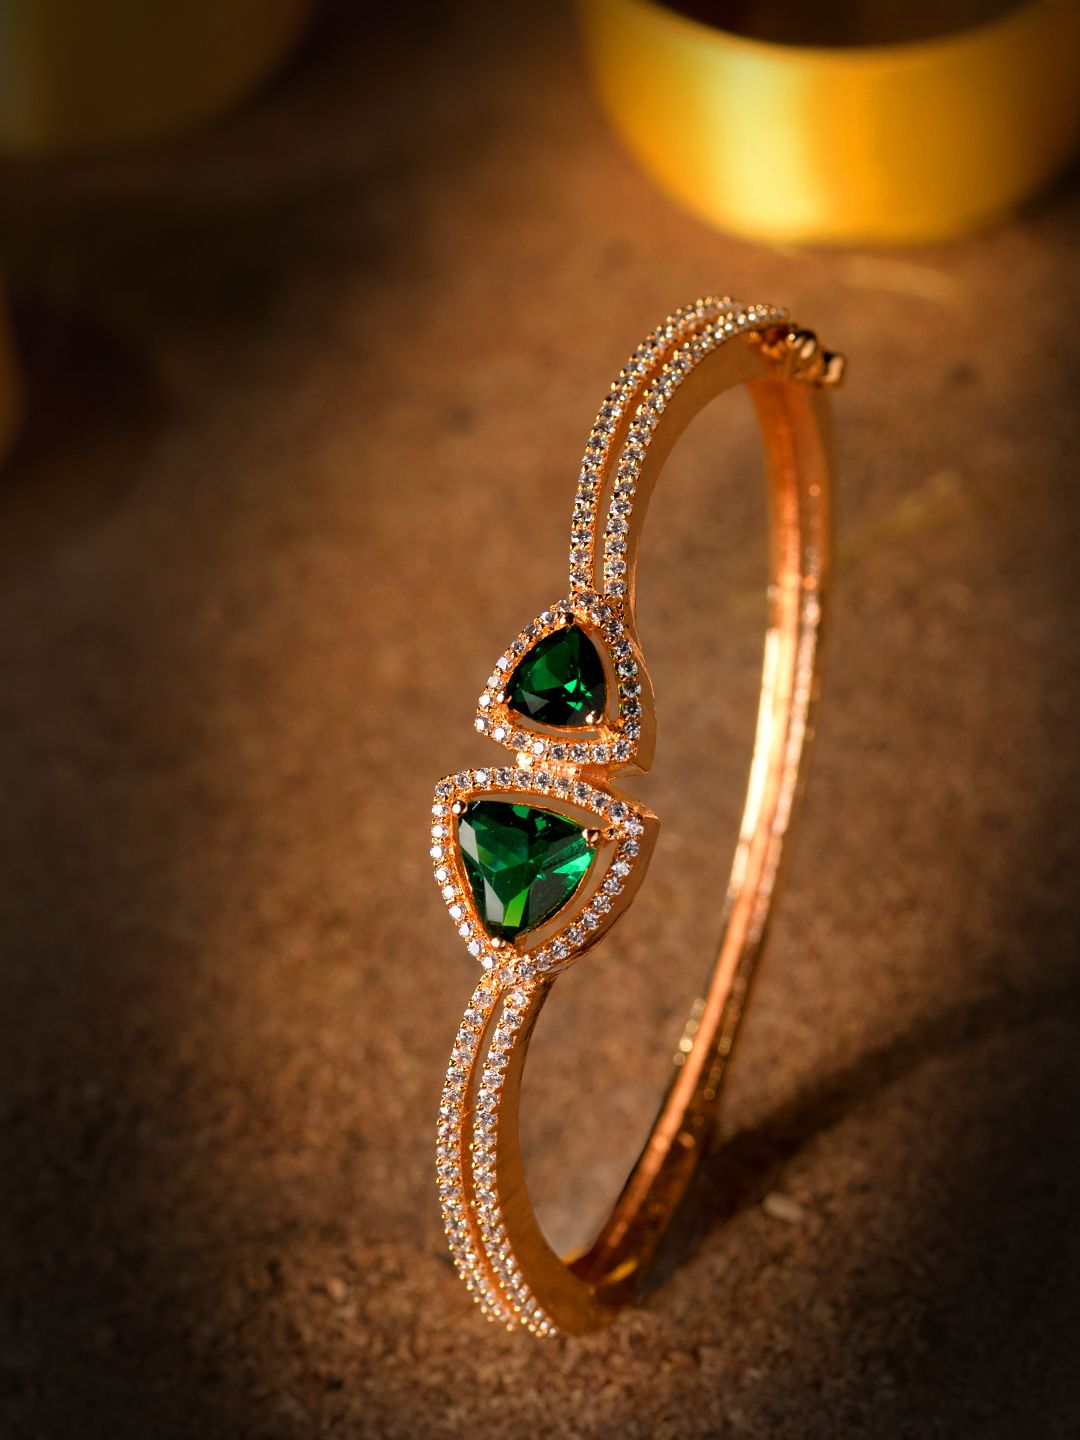 Saraf RS Jewellery Gold-Toned & Green AD Studded Handcrafted Bangle-Style Bracelet Price in India